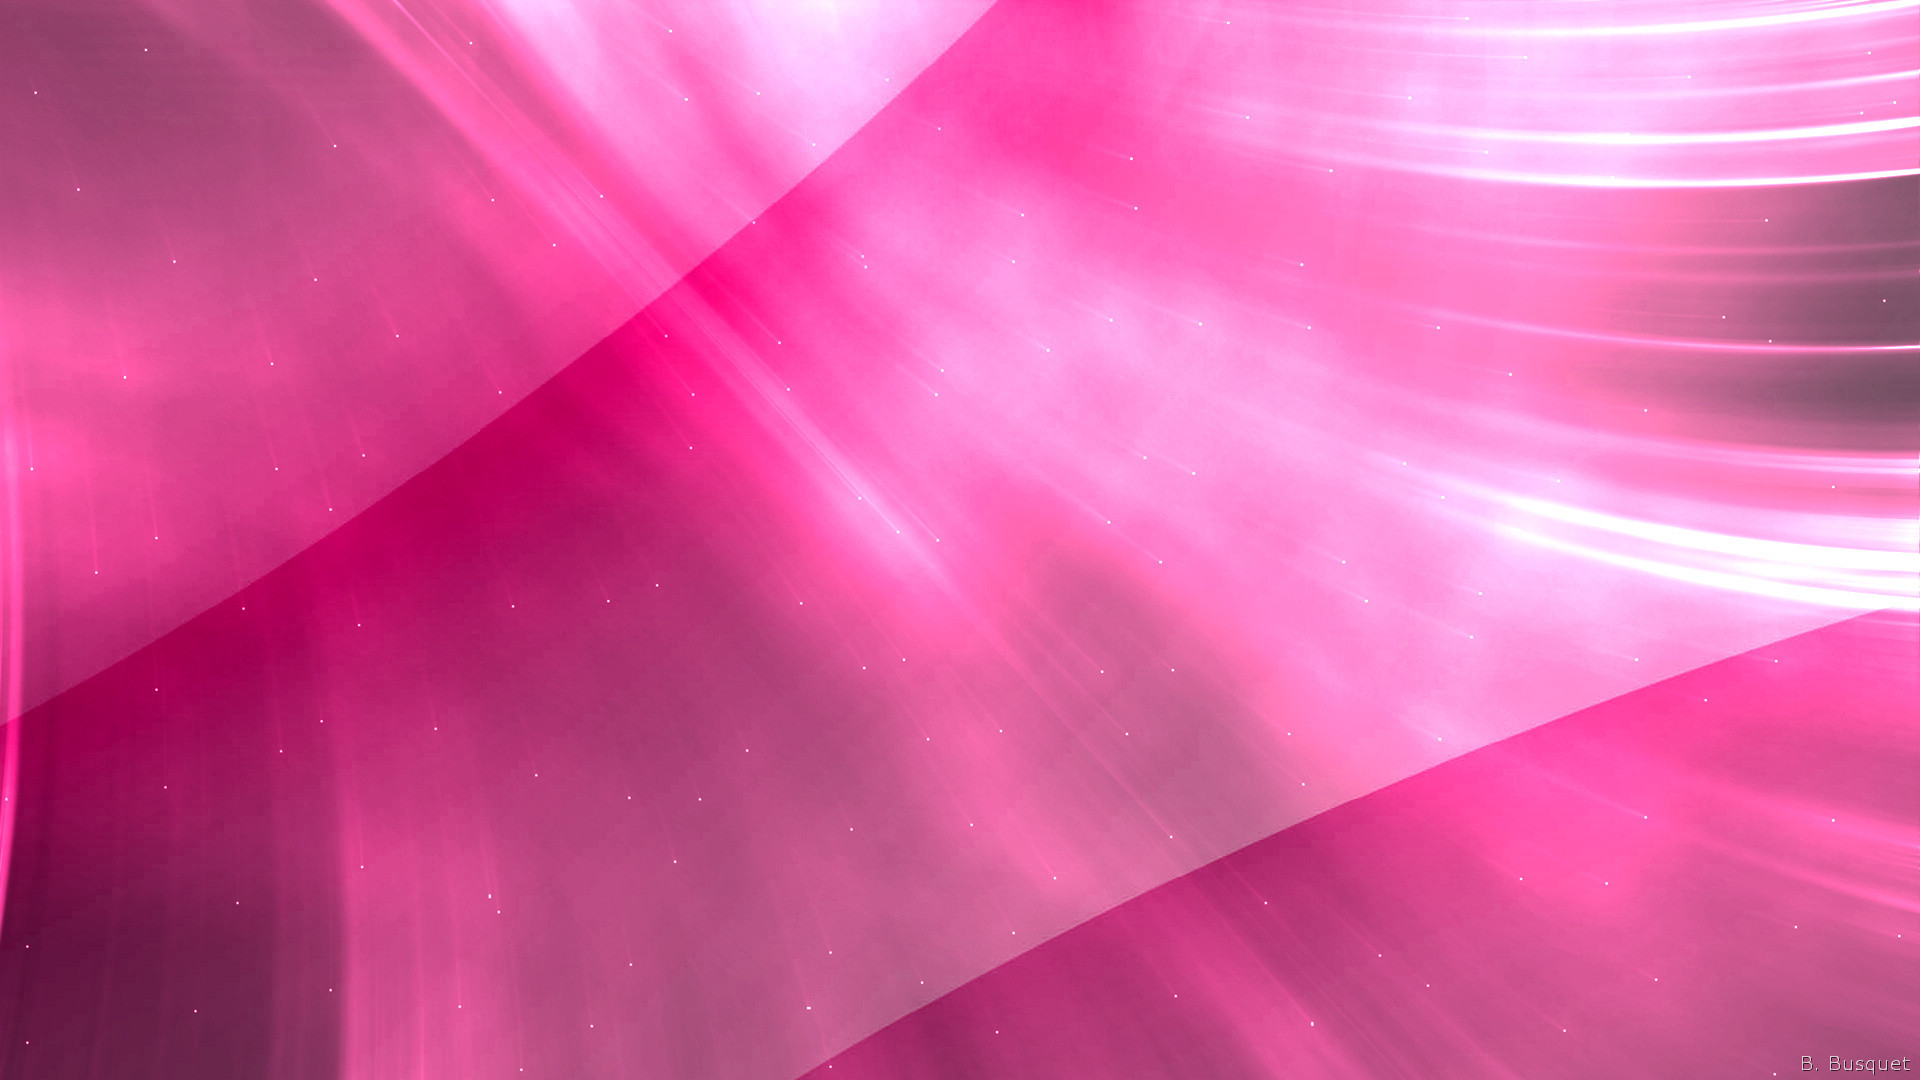 Abstract dark pink wallpaper with small lights